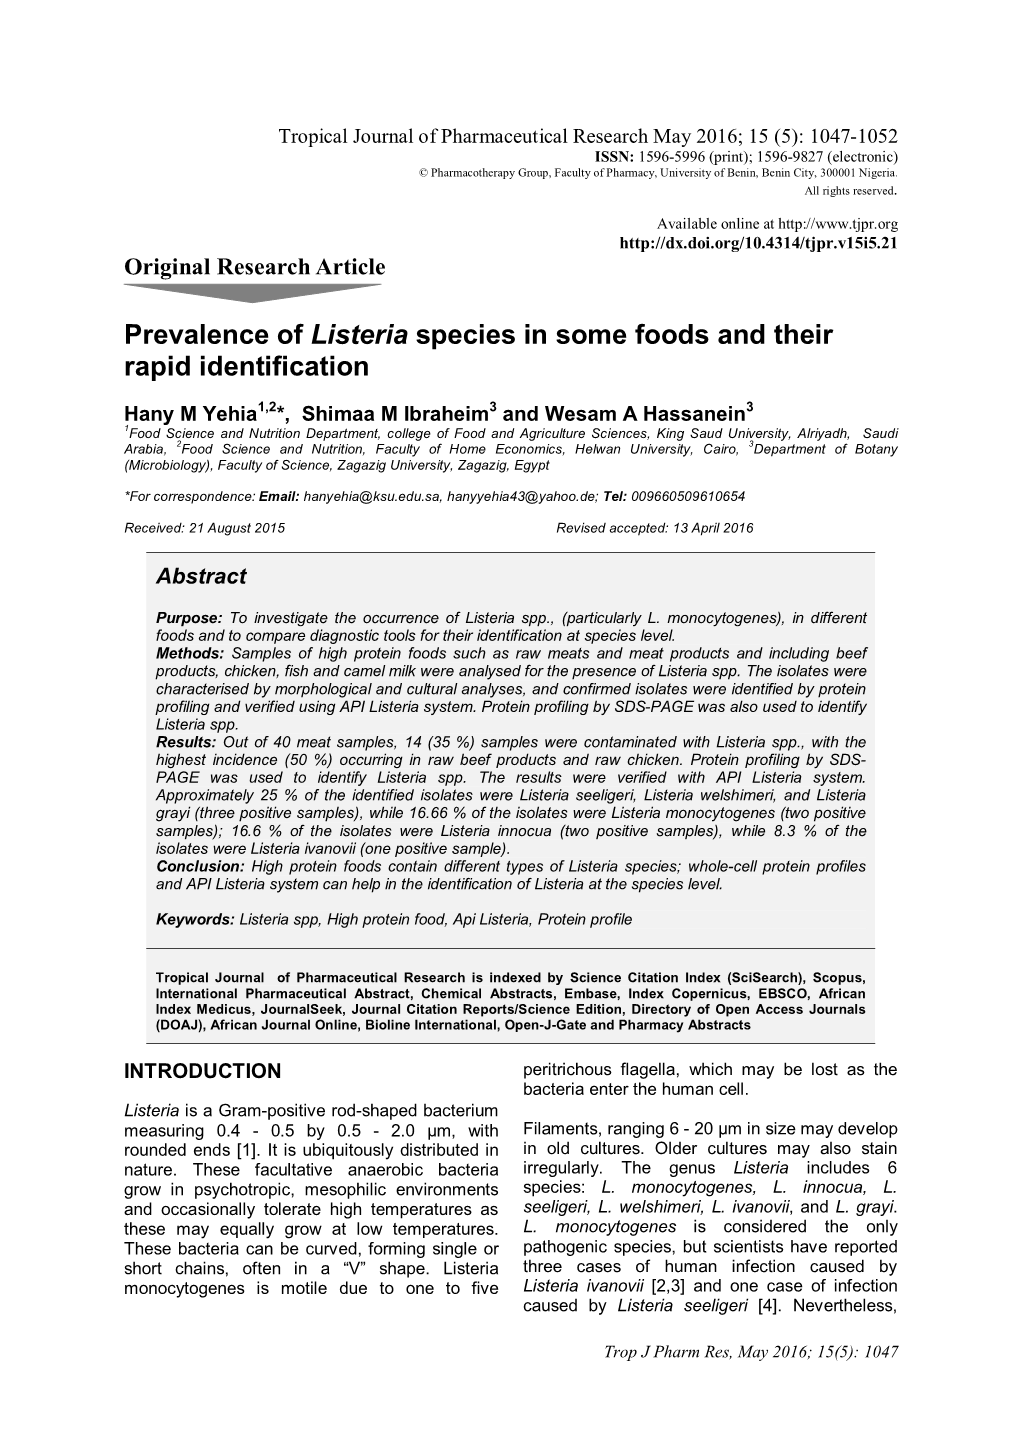 Prevalence of Listeria Species in Some Foods and Their Rapid Identification